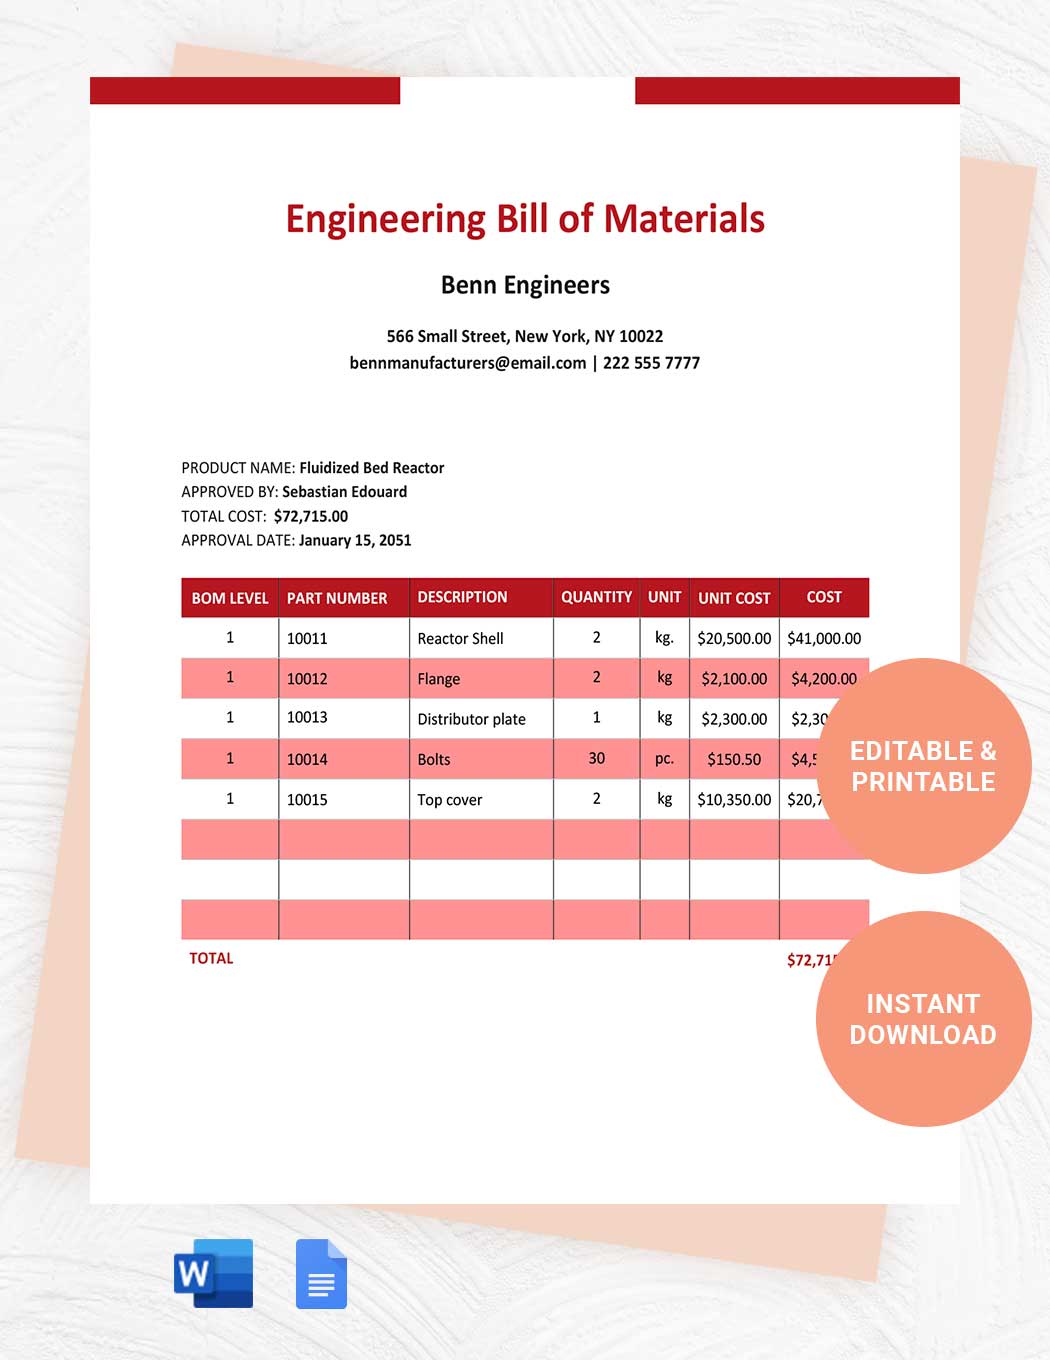 Engineering Bill Of Materials Template in Word, Google Docs